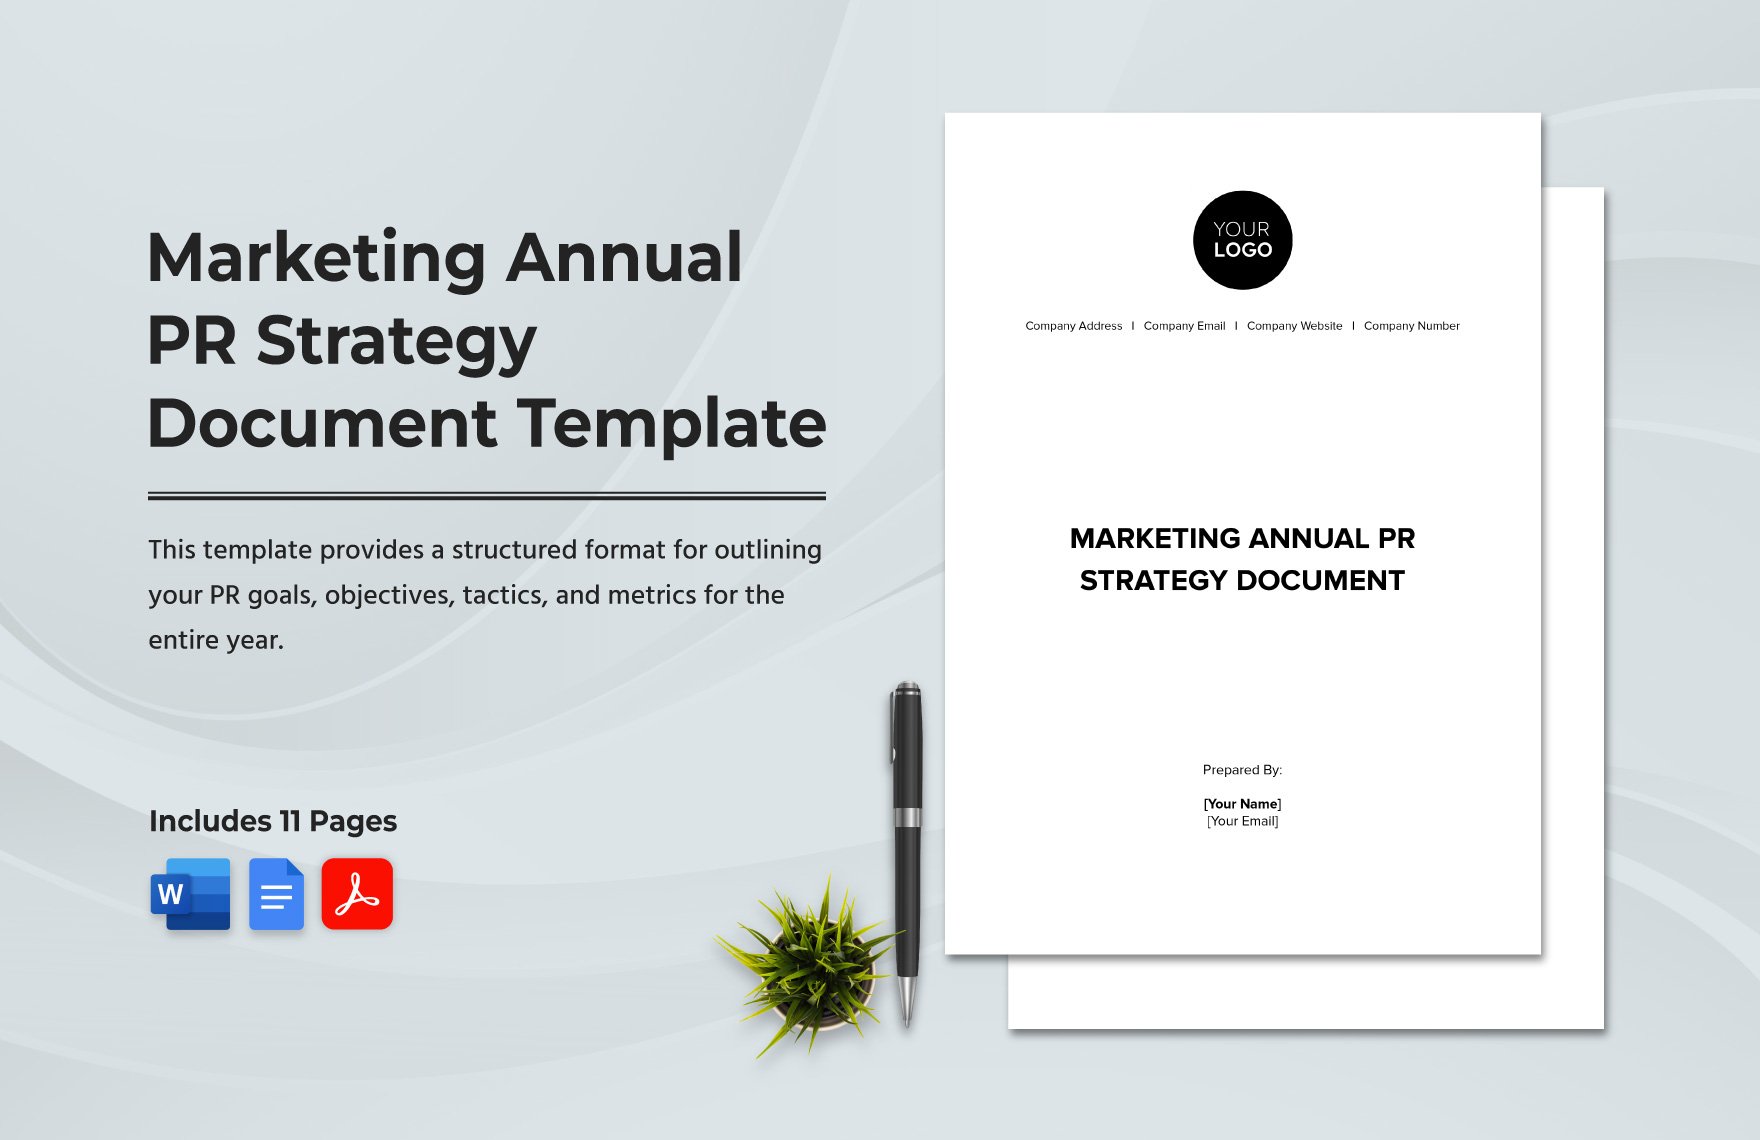 Marketing Annual PR Strategy Document Template in Word, Google Docs, PDF